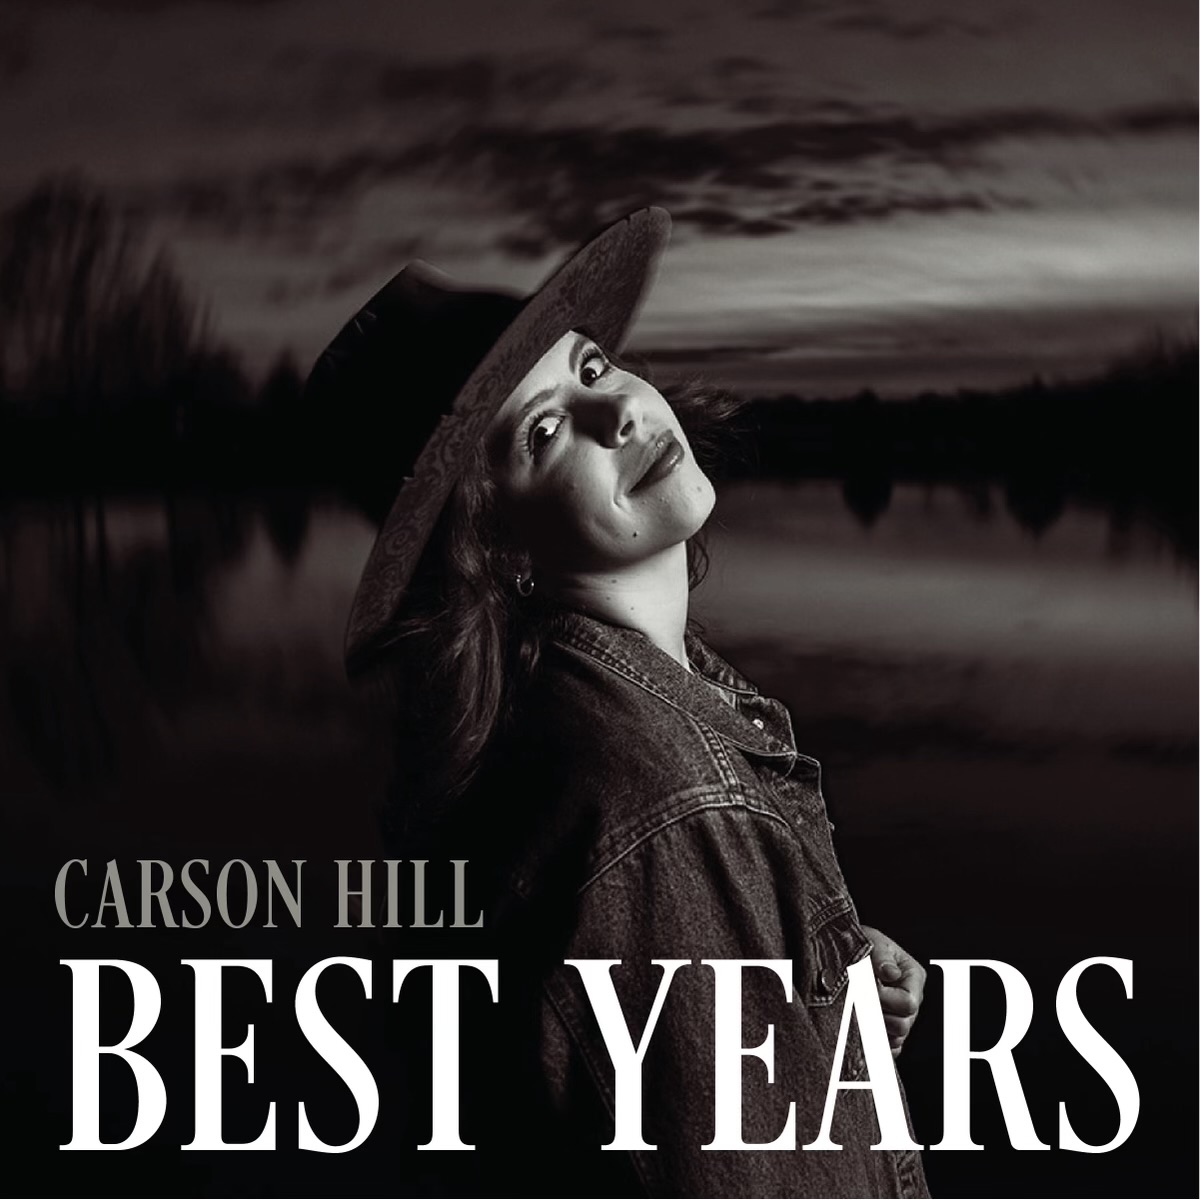 I'm excited to announce my new single 'Best Years' is releasing April 5th! Pre-save now! 

distrokid.com/dashboard/albu…

#NewMusic #Nashville #CarsonHill #BestYears #Singer #Songwriter #Folk #pop #april5th